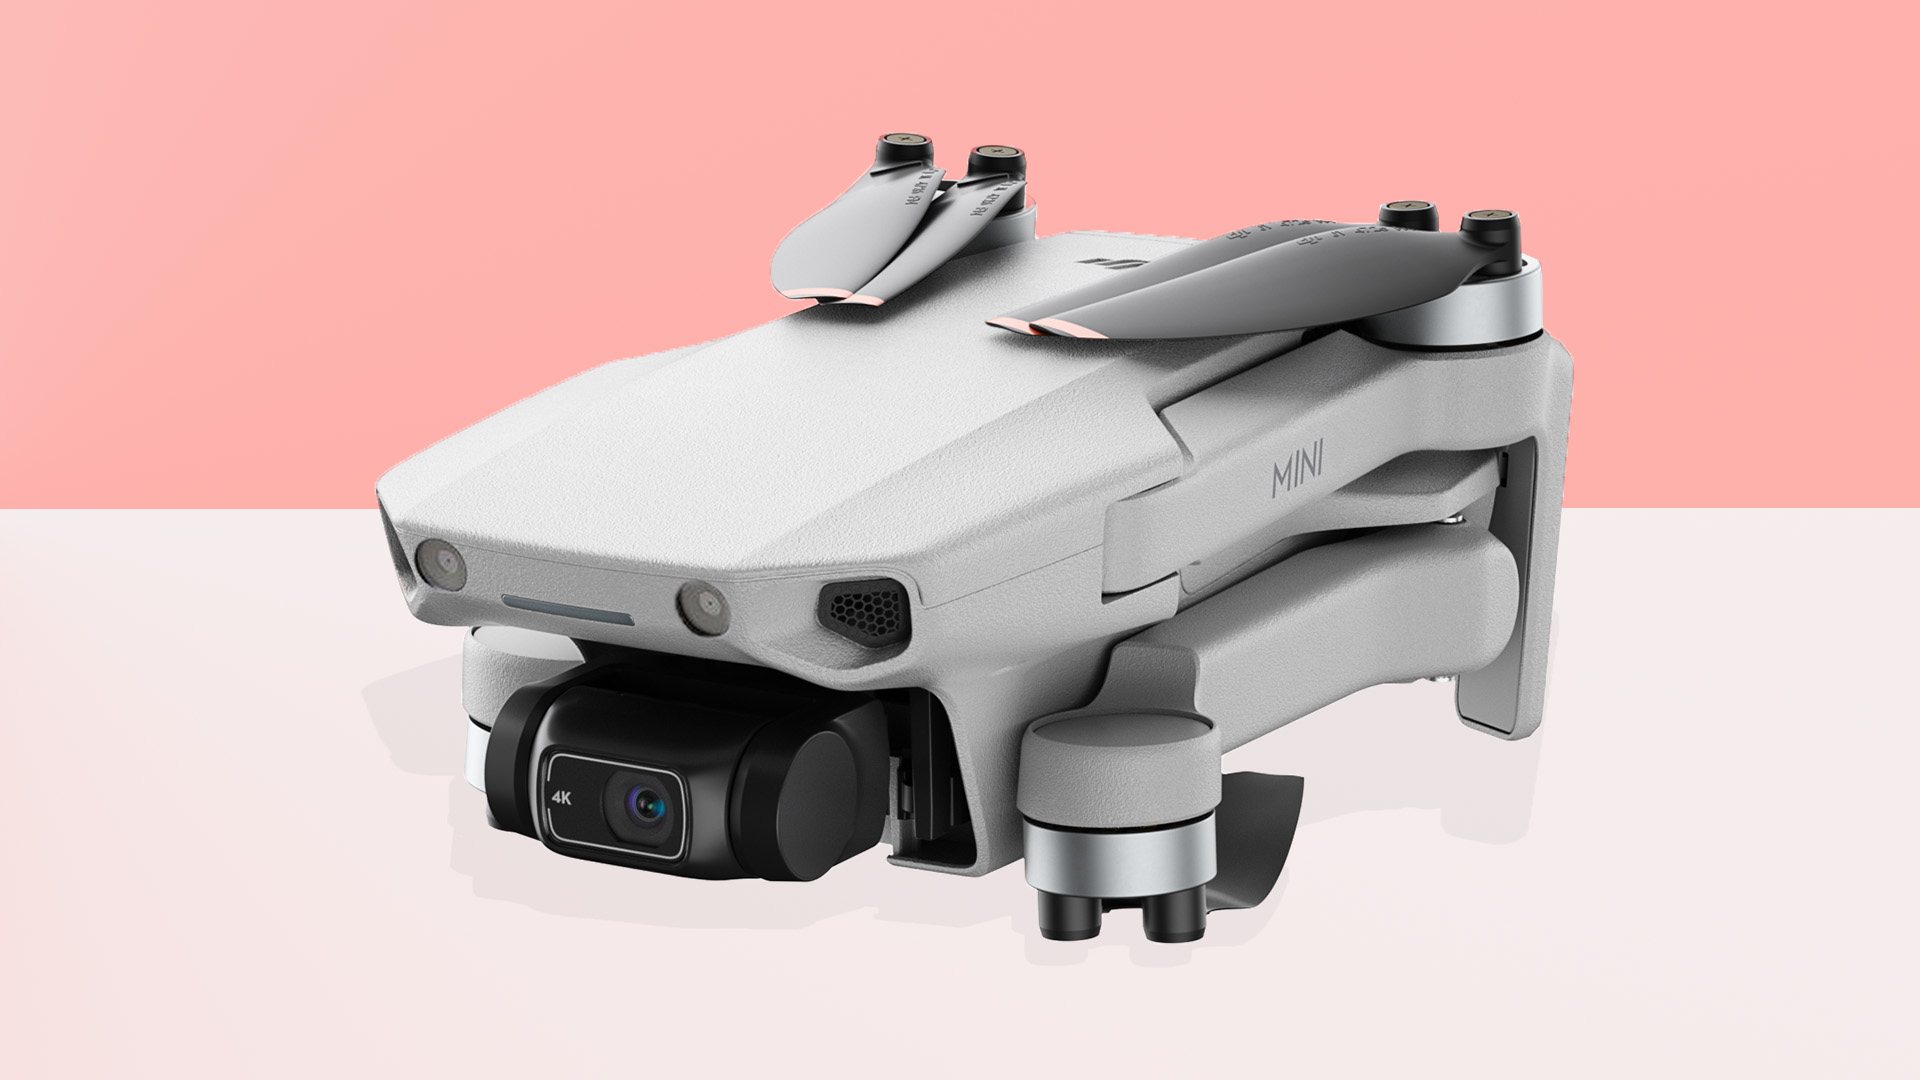 The DJI Mini 2 drone on a pink and grey background